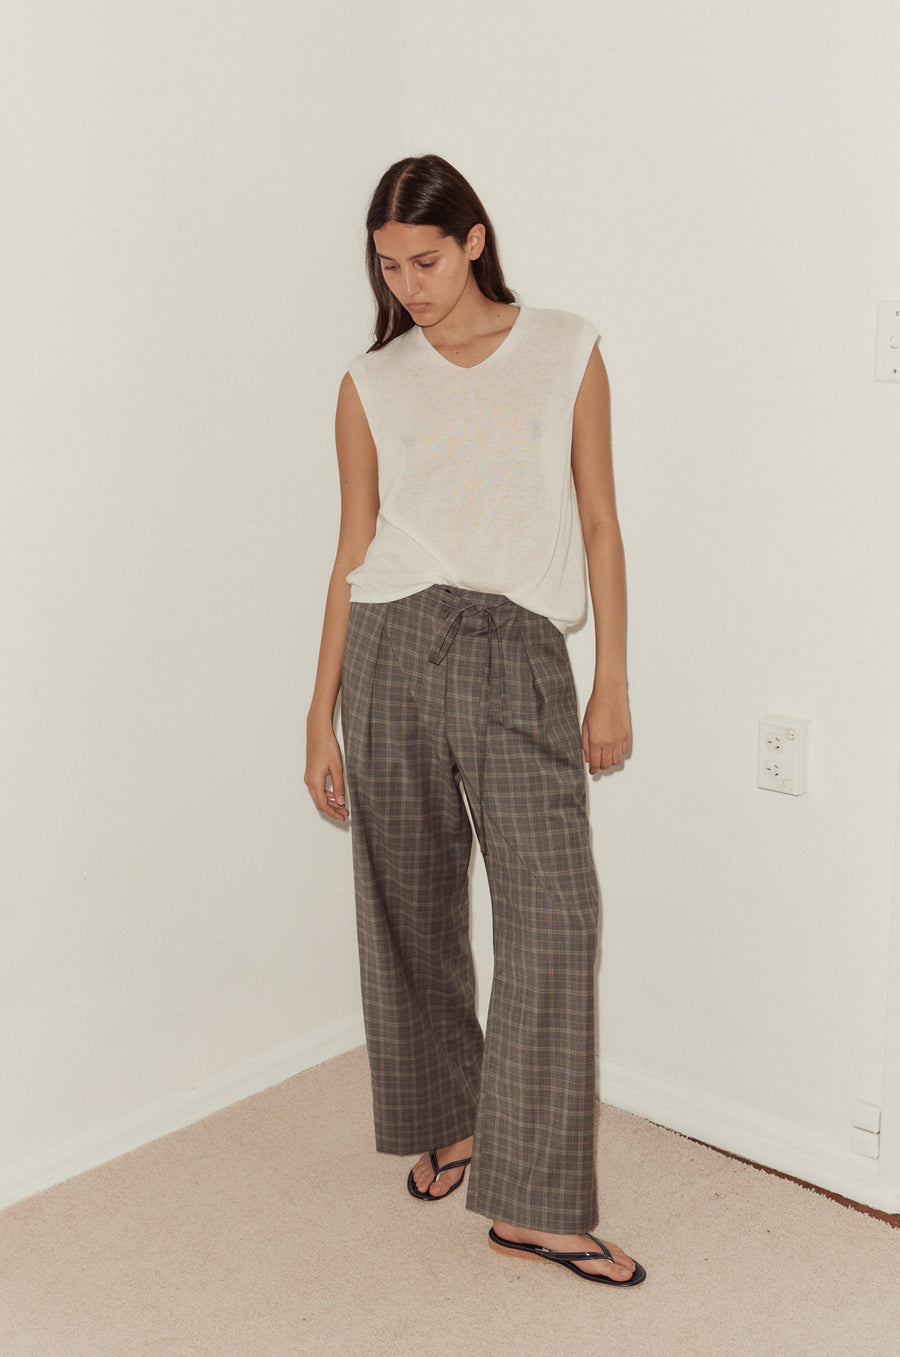 Mid shot of female model wearing the Tailored Pants in Everyday Check styled with the Loose Knitted Vest in white. Pant features relaxed leg, tailored pleat detail, button closure and self fabric tie at waist.